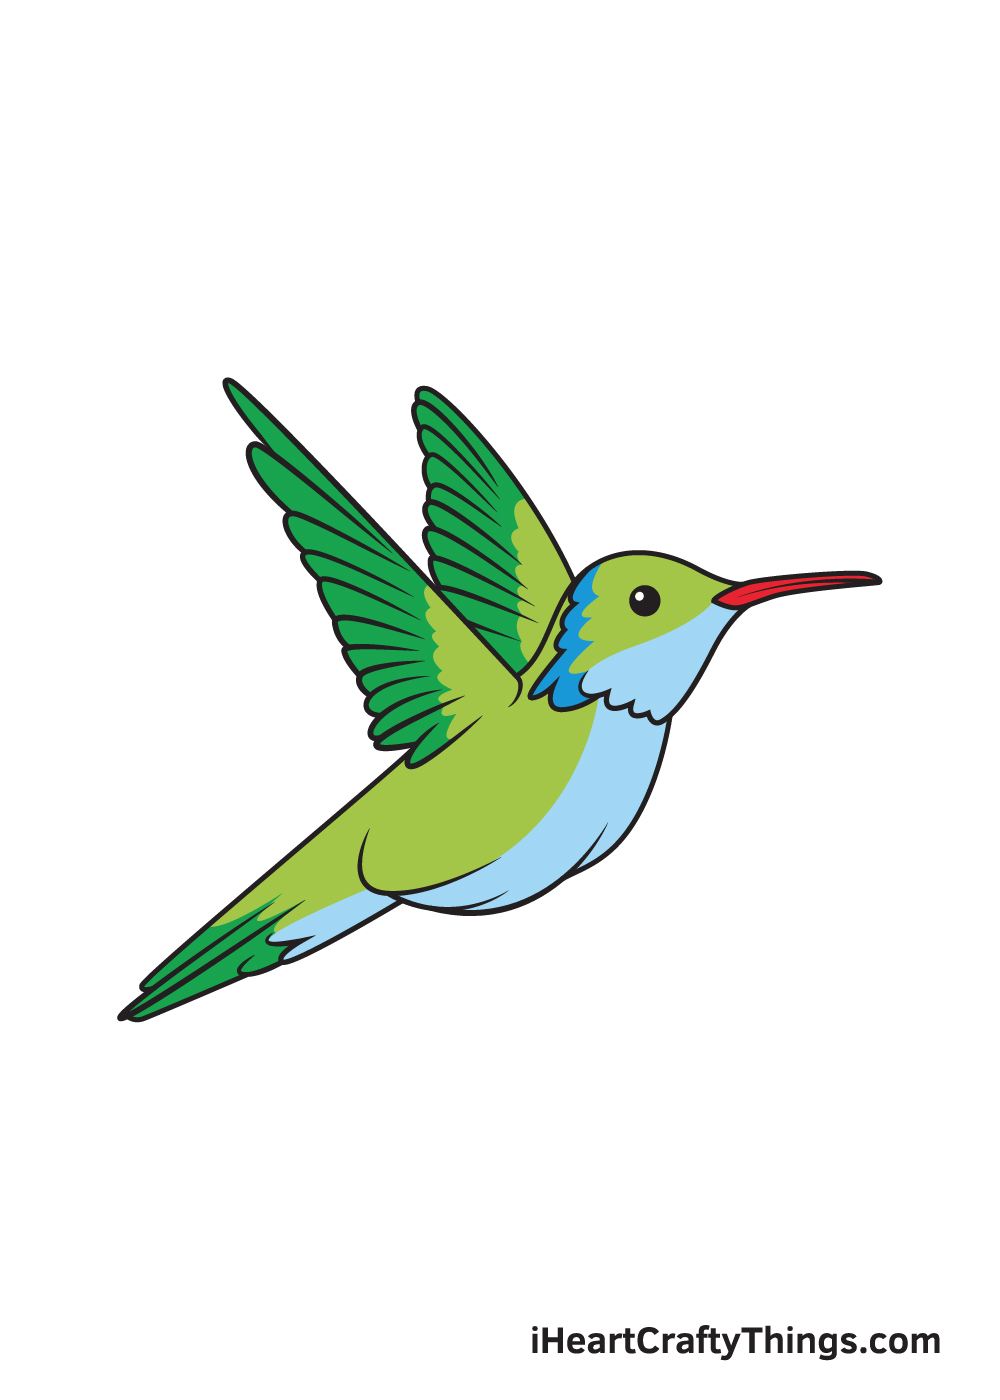 Drawing Of An Illustration Of Hummingbirds Flying Outline Sketch Vector Hummingbirds  Drawing Hummingbirds Outline Hummingbirds Sketch PNG and Vector with  Transparent Background for Free Download